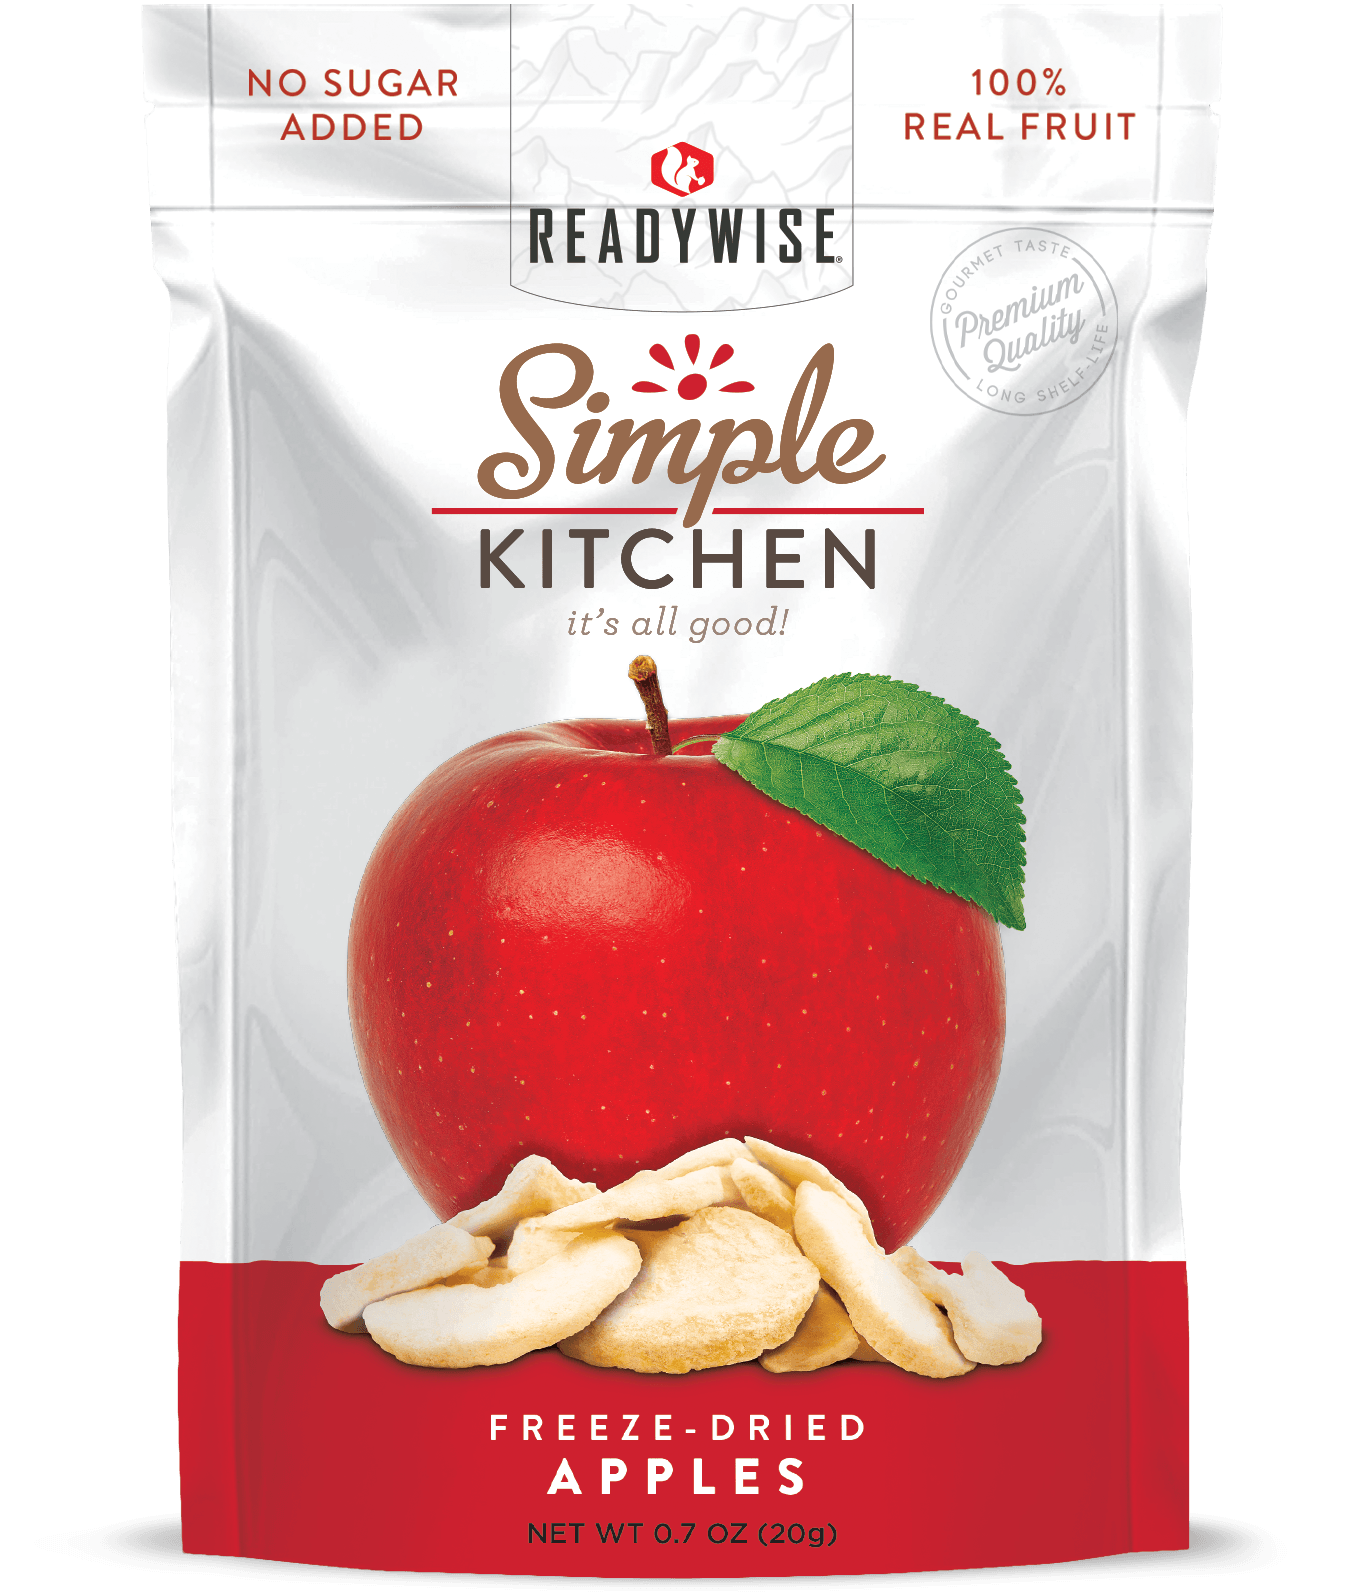 Healthy-snack-delicious-nutritious-freeze-dried-apples-SimpleKitchen